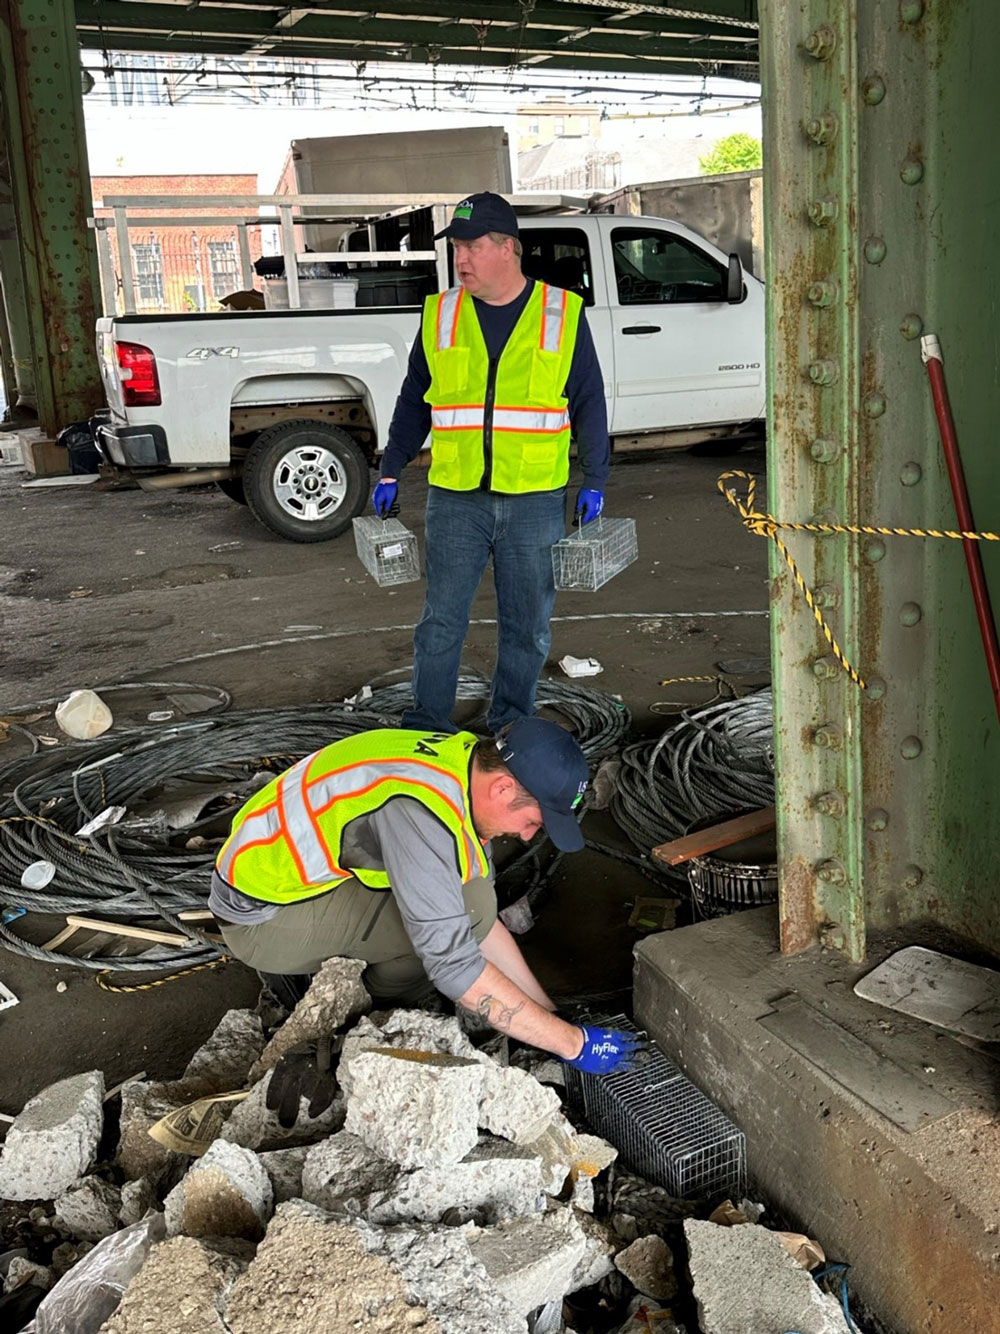 William Wilmoth (top of photo), APHIS Wildlife Services-New York Assistant State Director, and John Short, Biological Sciences Technician with APHIS, prepare live traps in Brooklyn to capture Norway rats